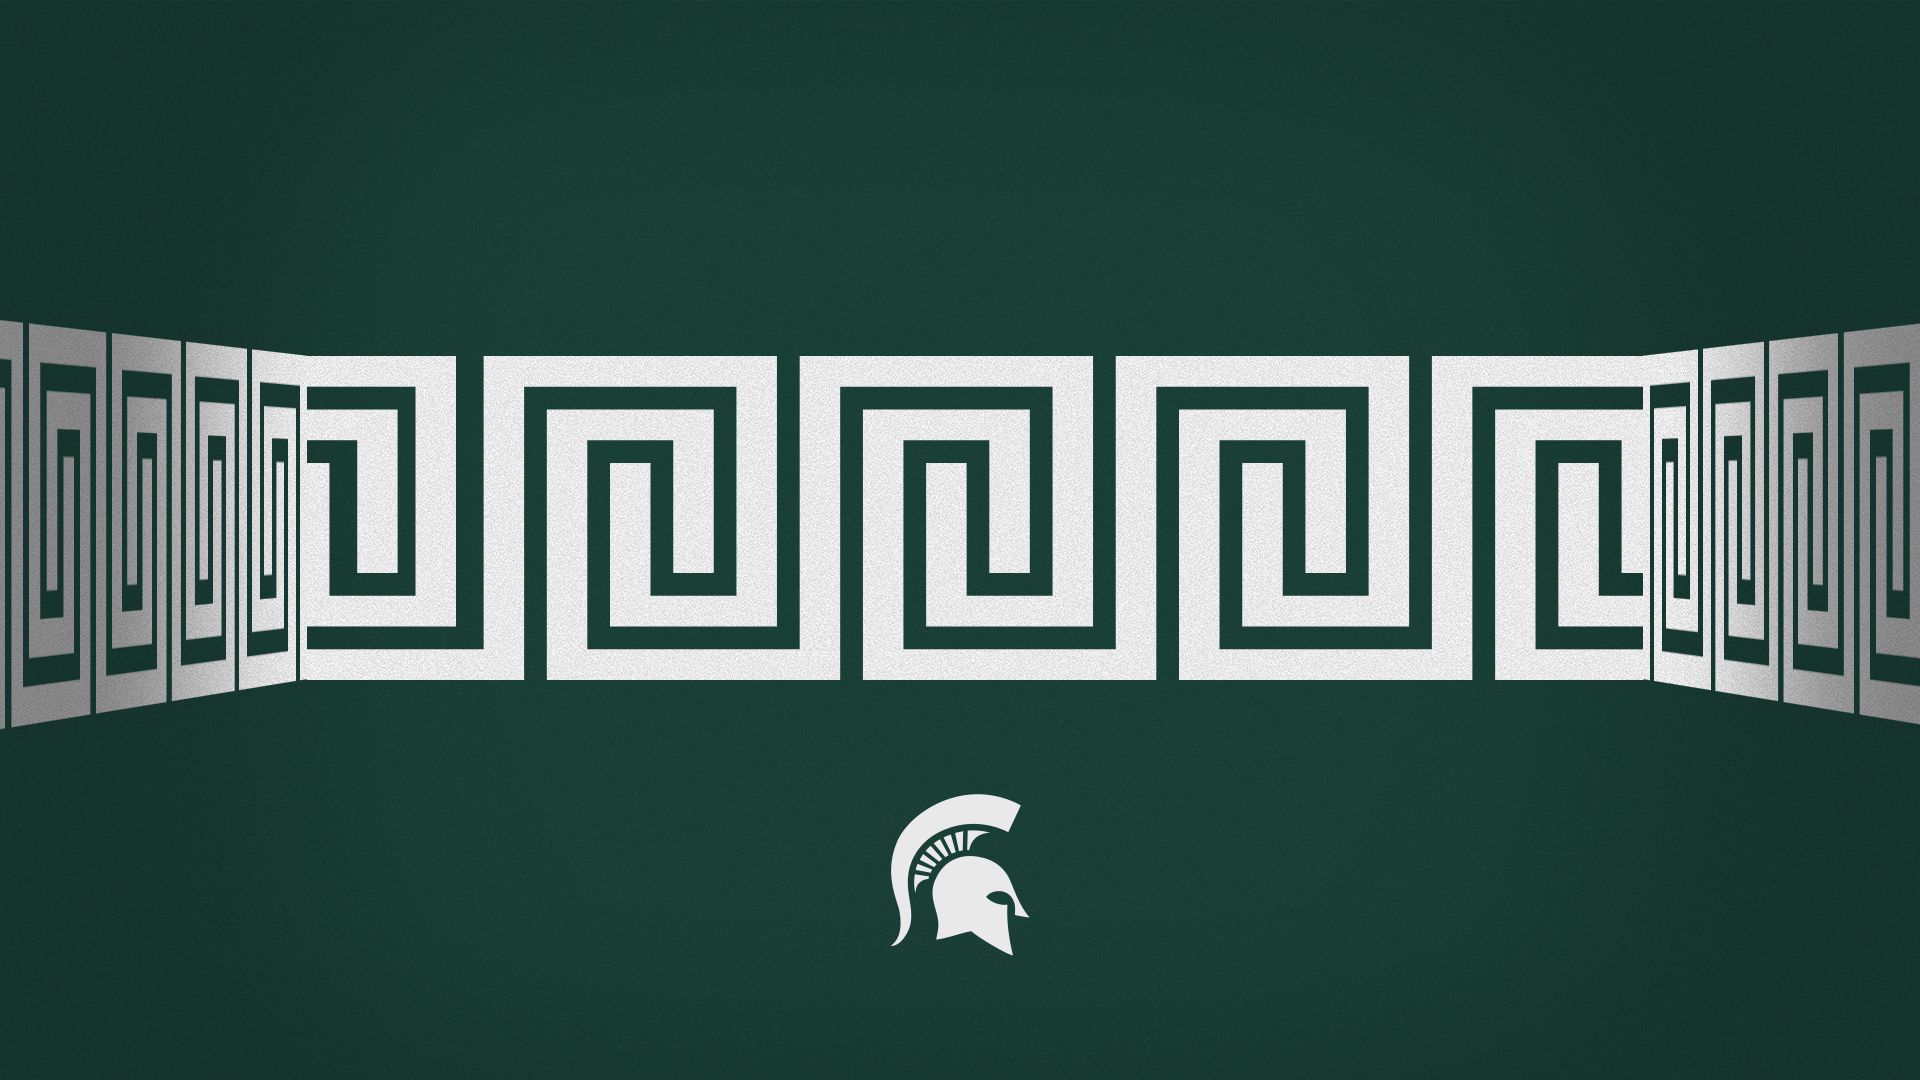 More Designs Added to Spartan Athletics Zoom Background